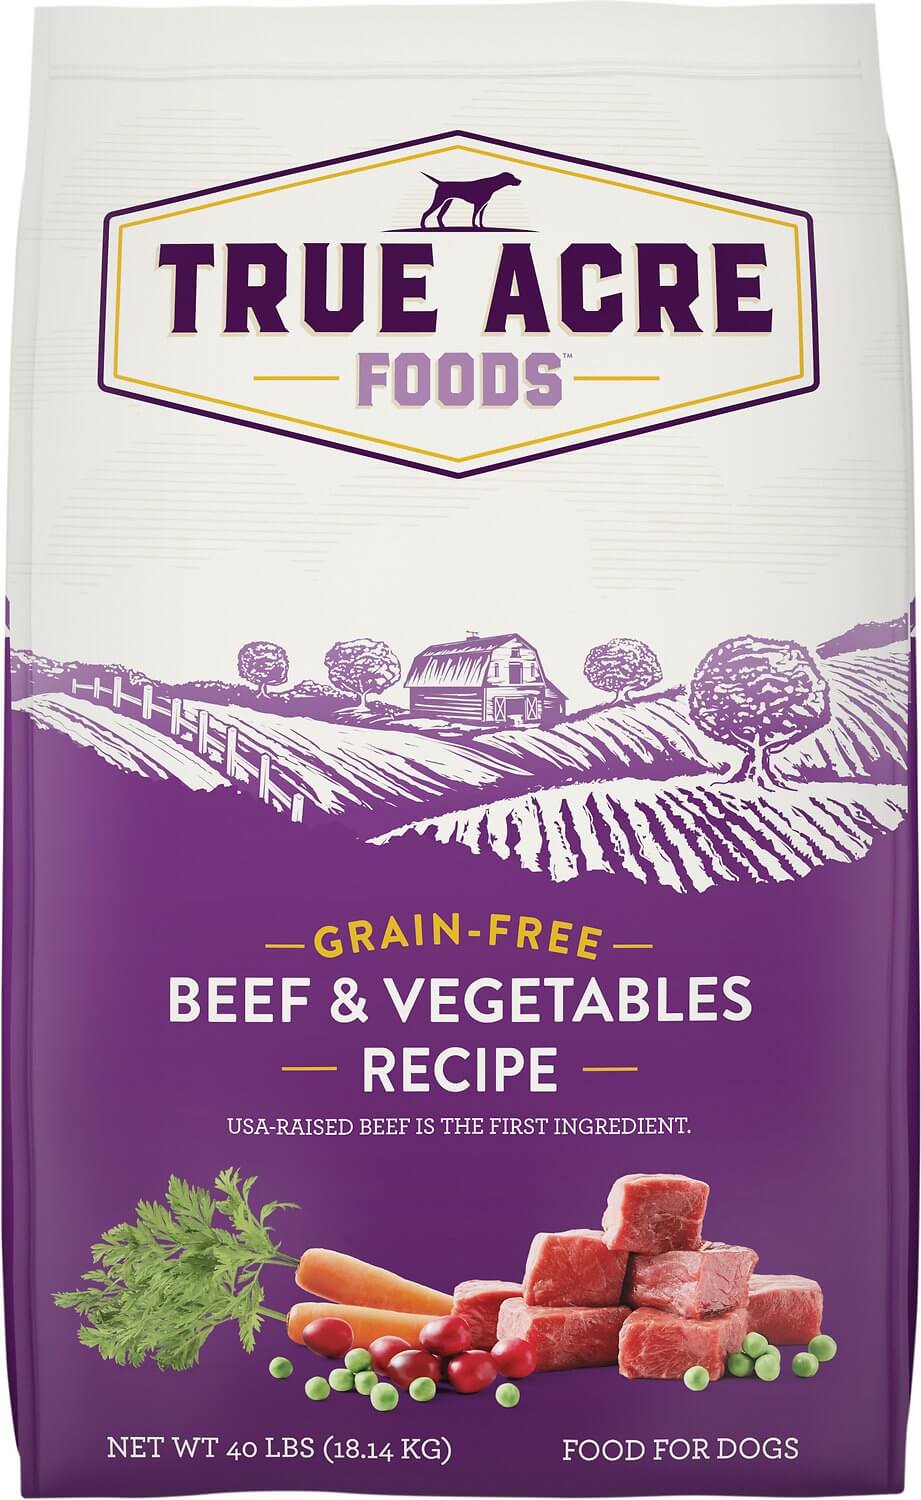 True Acre Dog Food | Review | Rating 